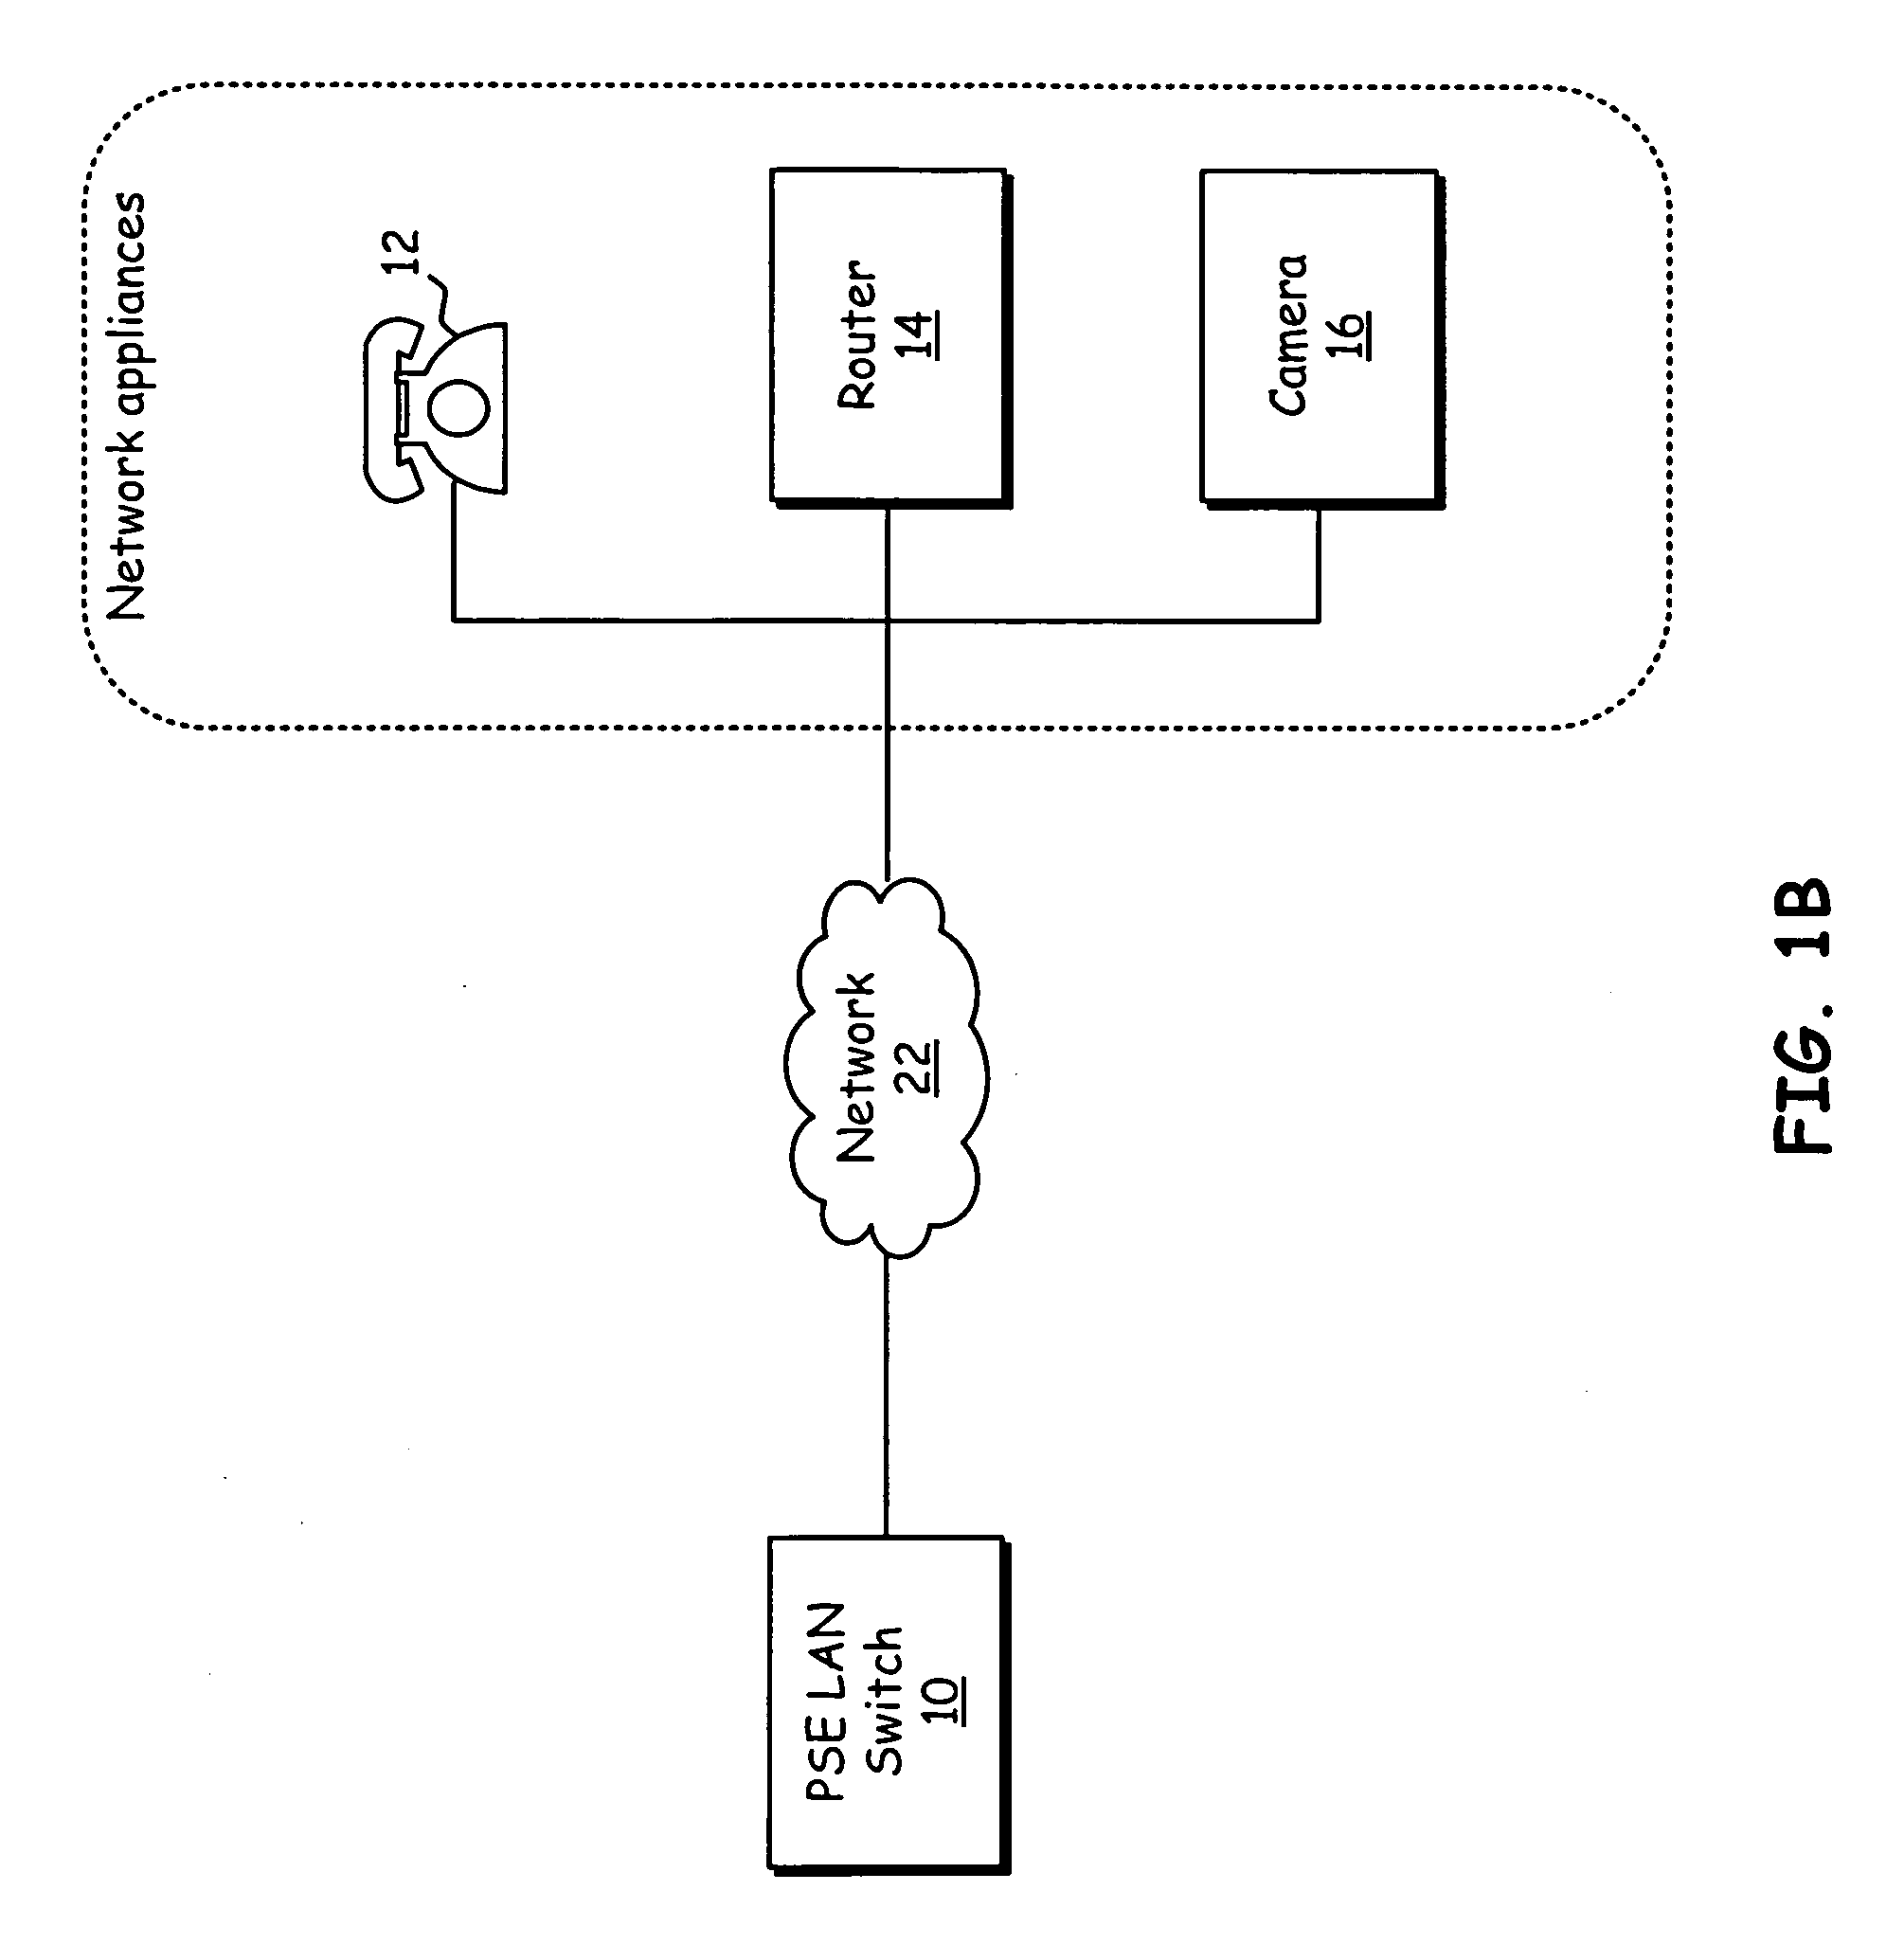 Method for dynamic insertion loss control for 10/100/1000 mhz ethernet signaling